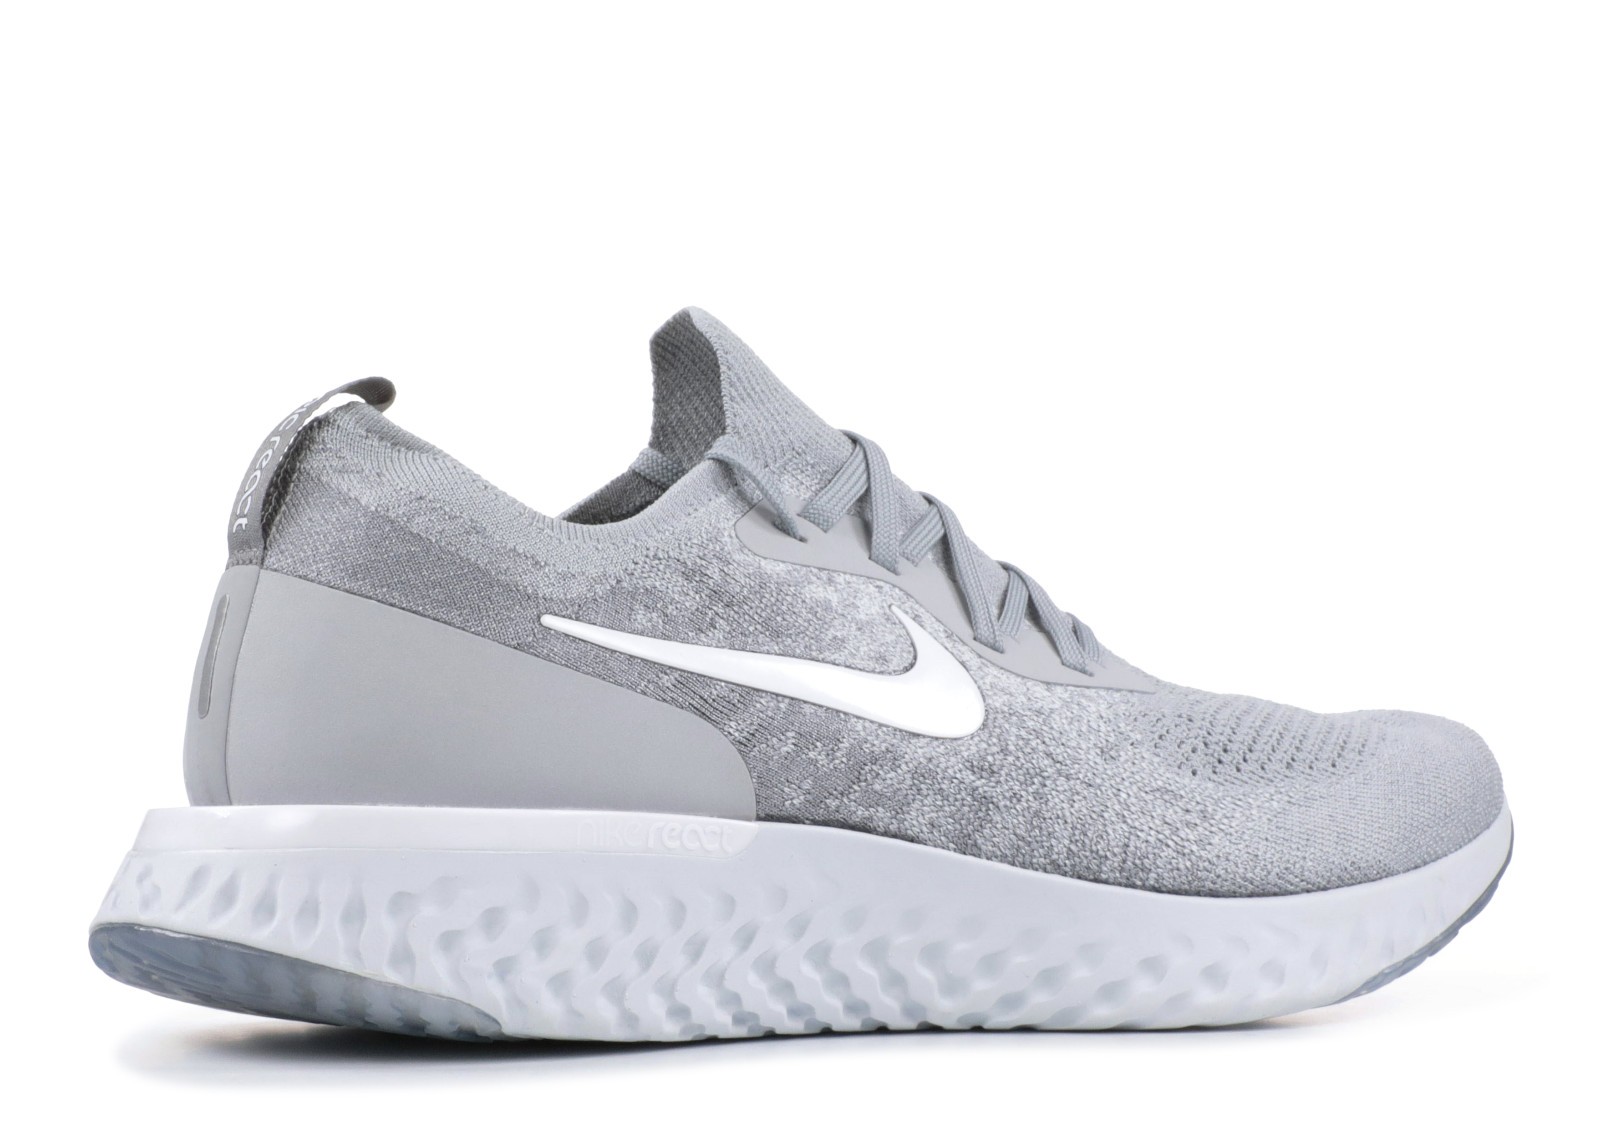 Rommelig gewoontjes omringen 002 - MultiscaleconsultingShops - Nike Epic React Flyknit White Wolf Grey  Cool AQ0067 - Nike Air Zoom Vomero 14 Hardloopschoen voor dames Wit